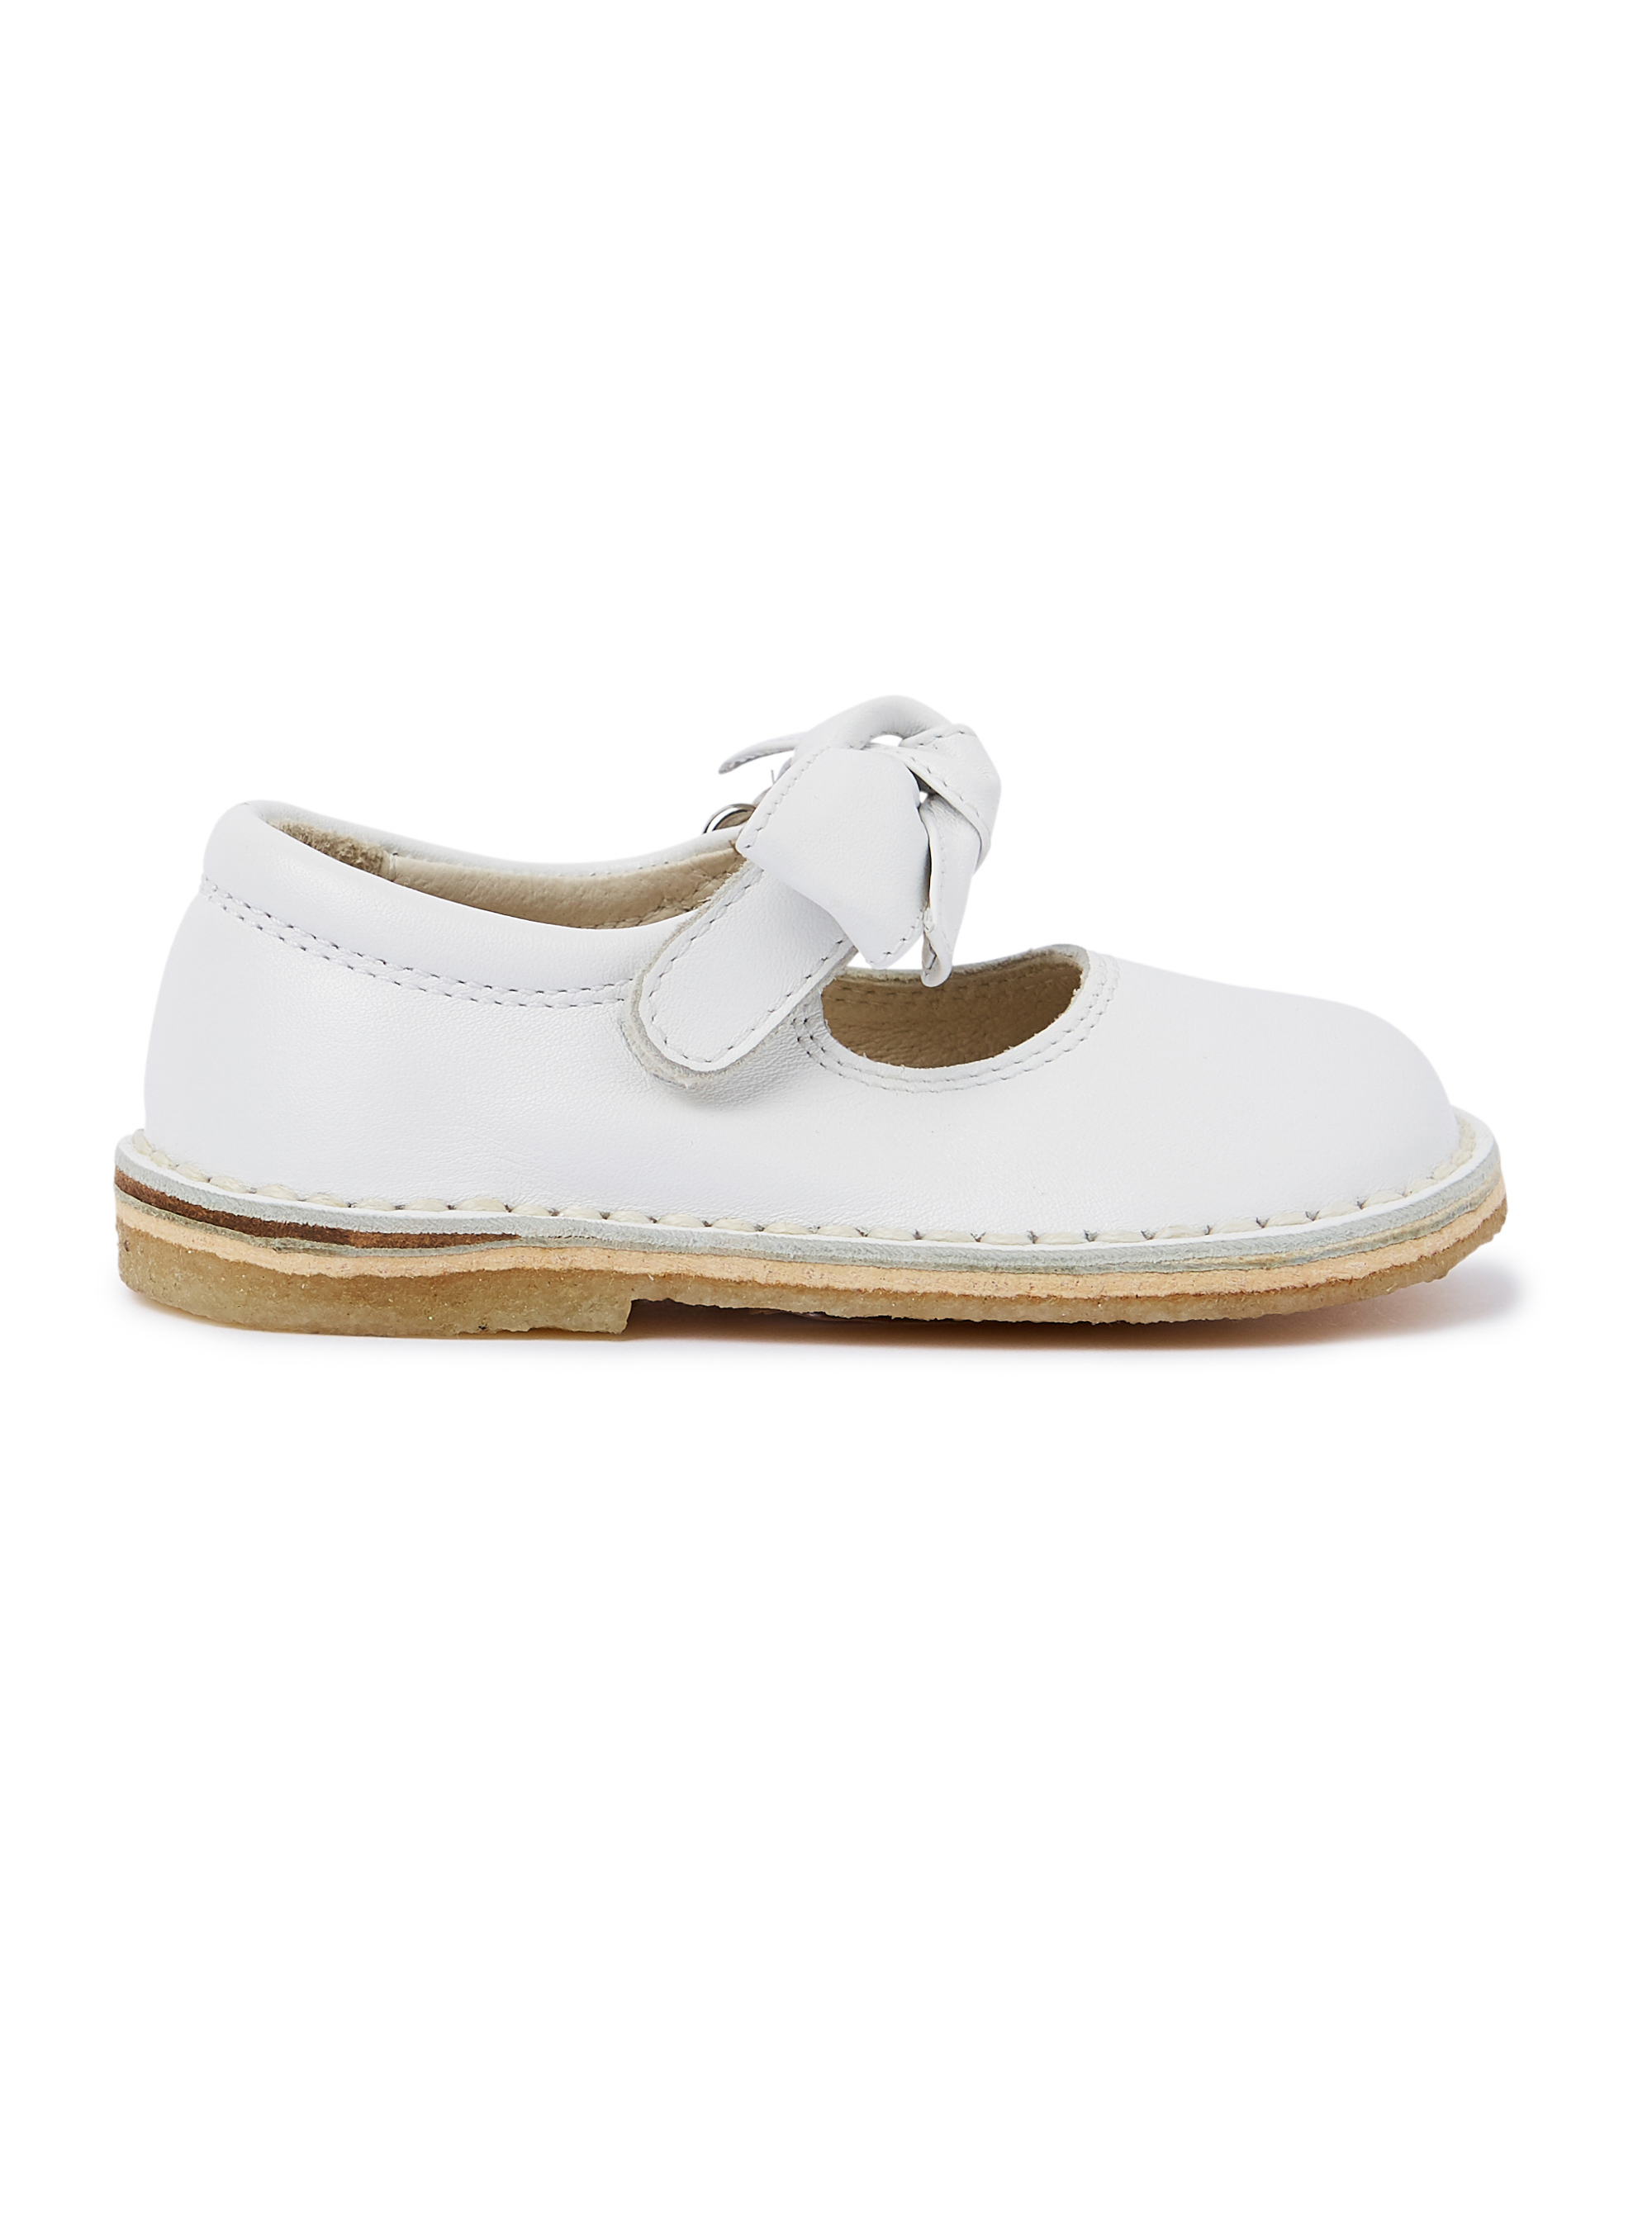 Nappa shoes with bow - White | Il Gufo